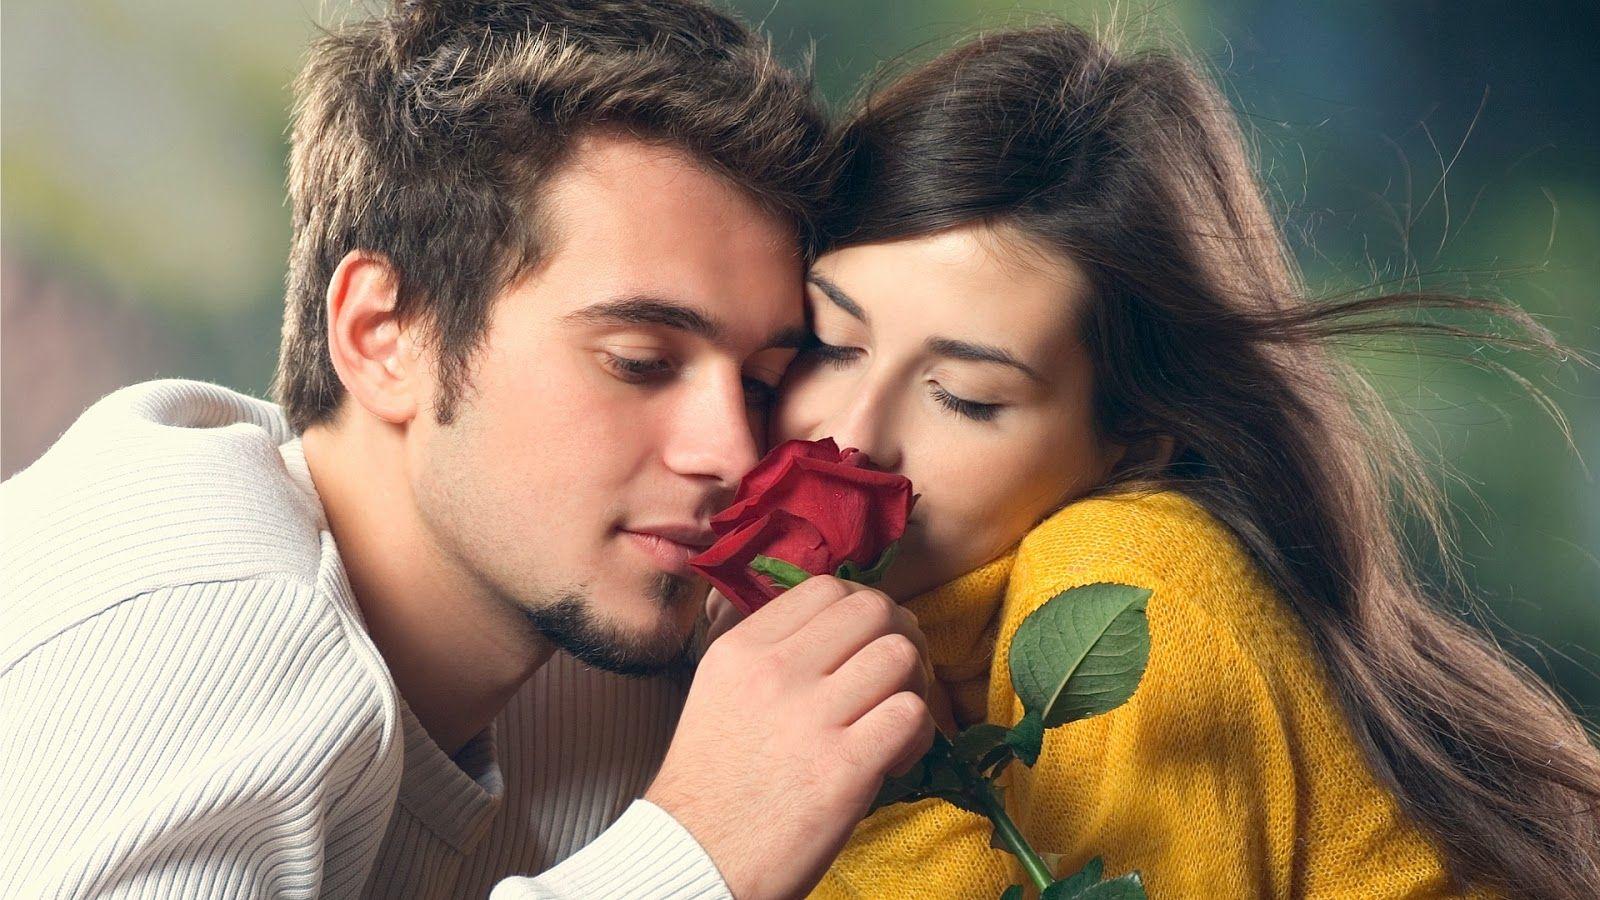 Lovers In Love Card HD Photo Free Download